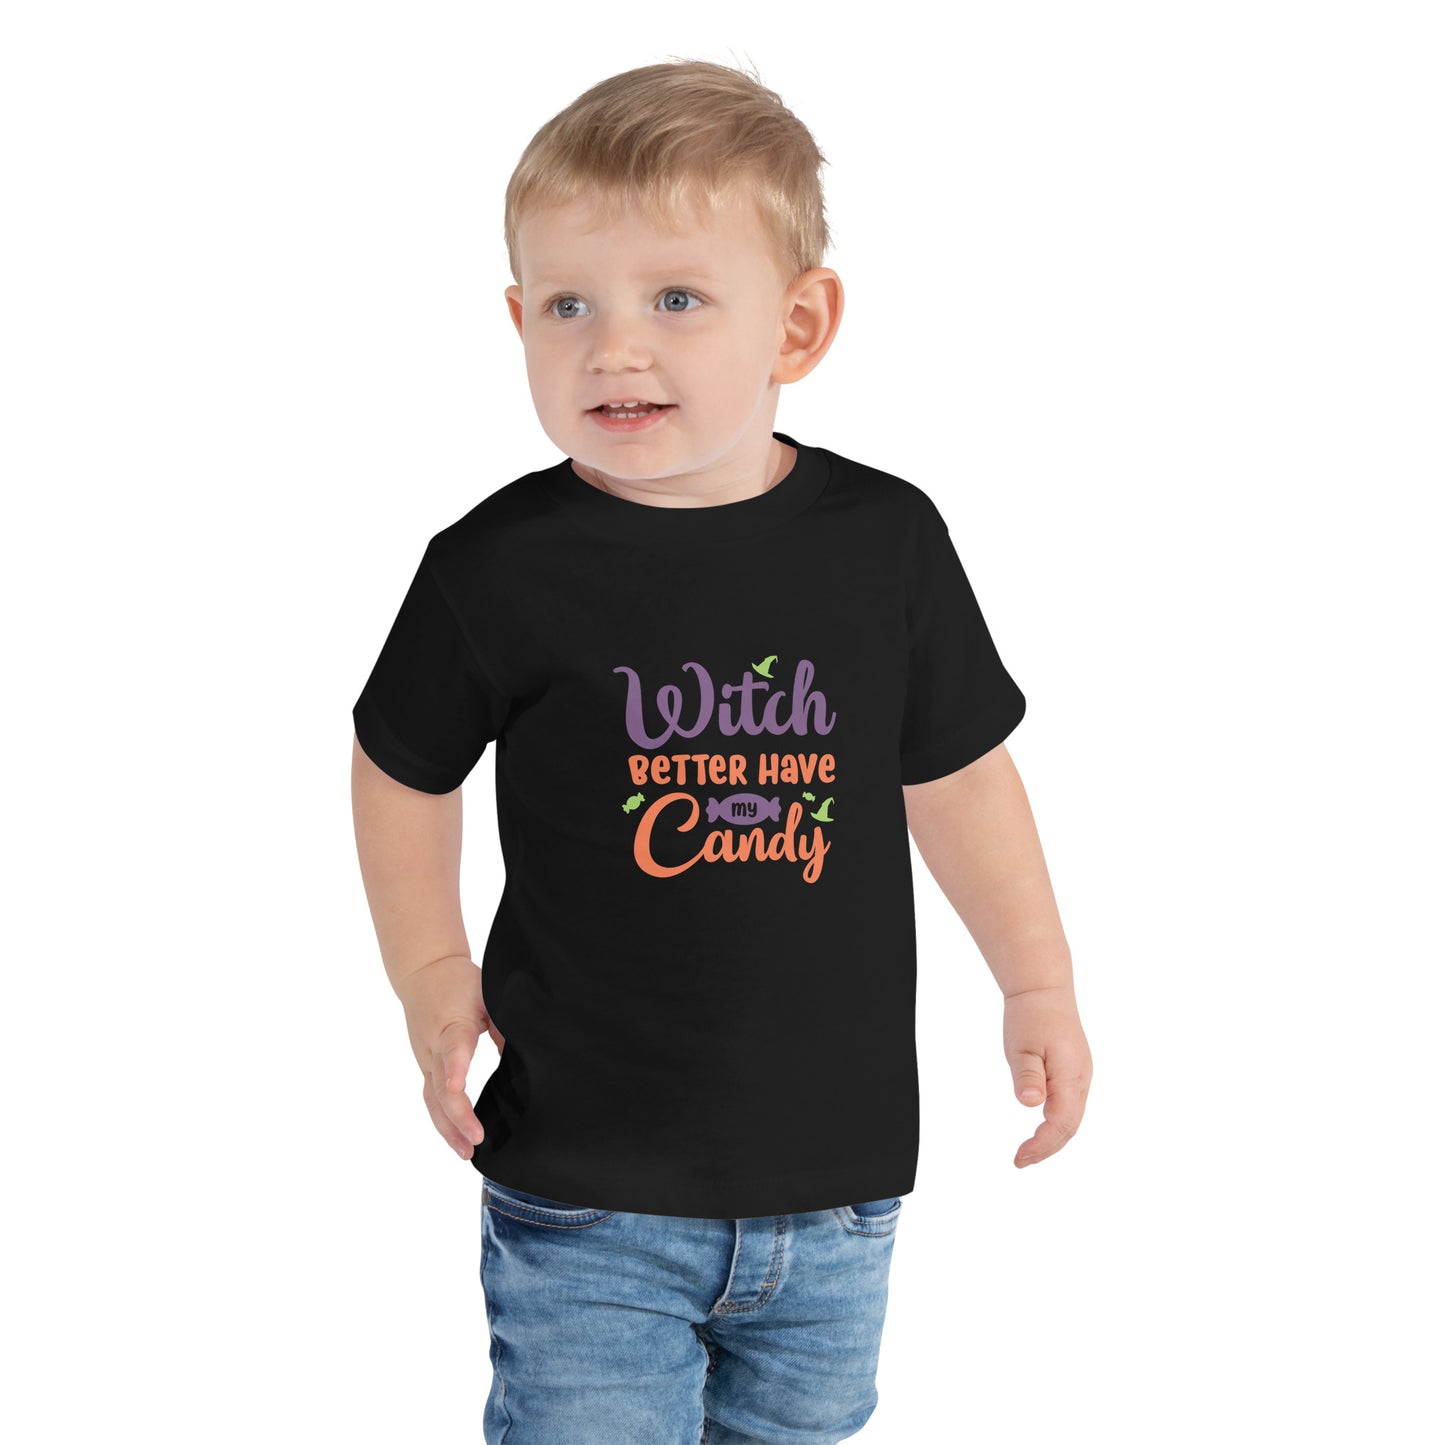 Witch Better Have My Candy Toddler Short Sleeve Tee